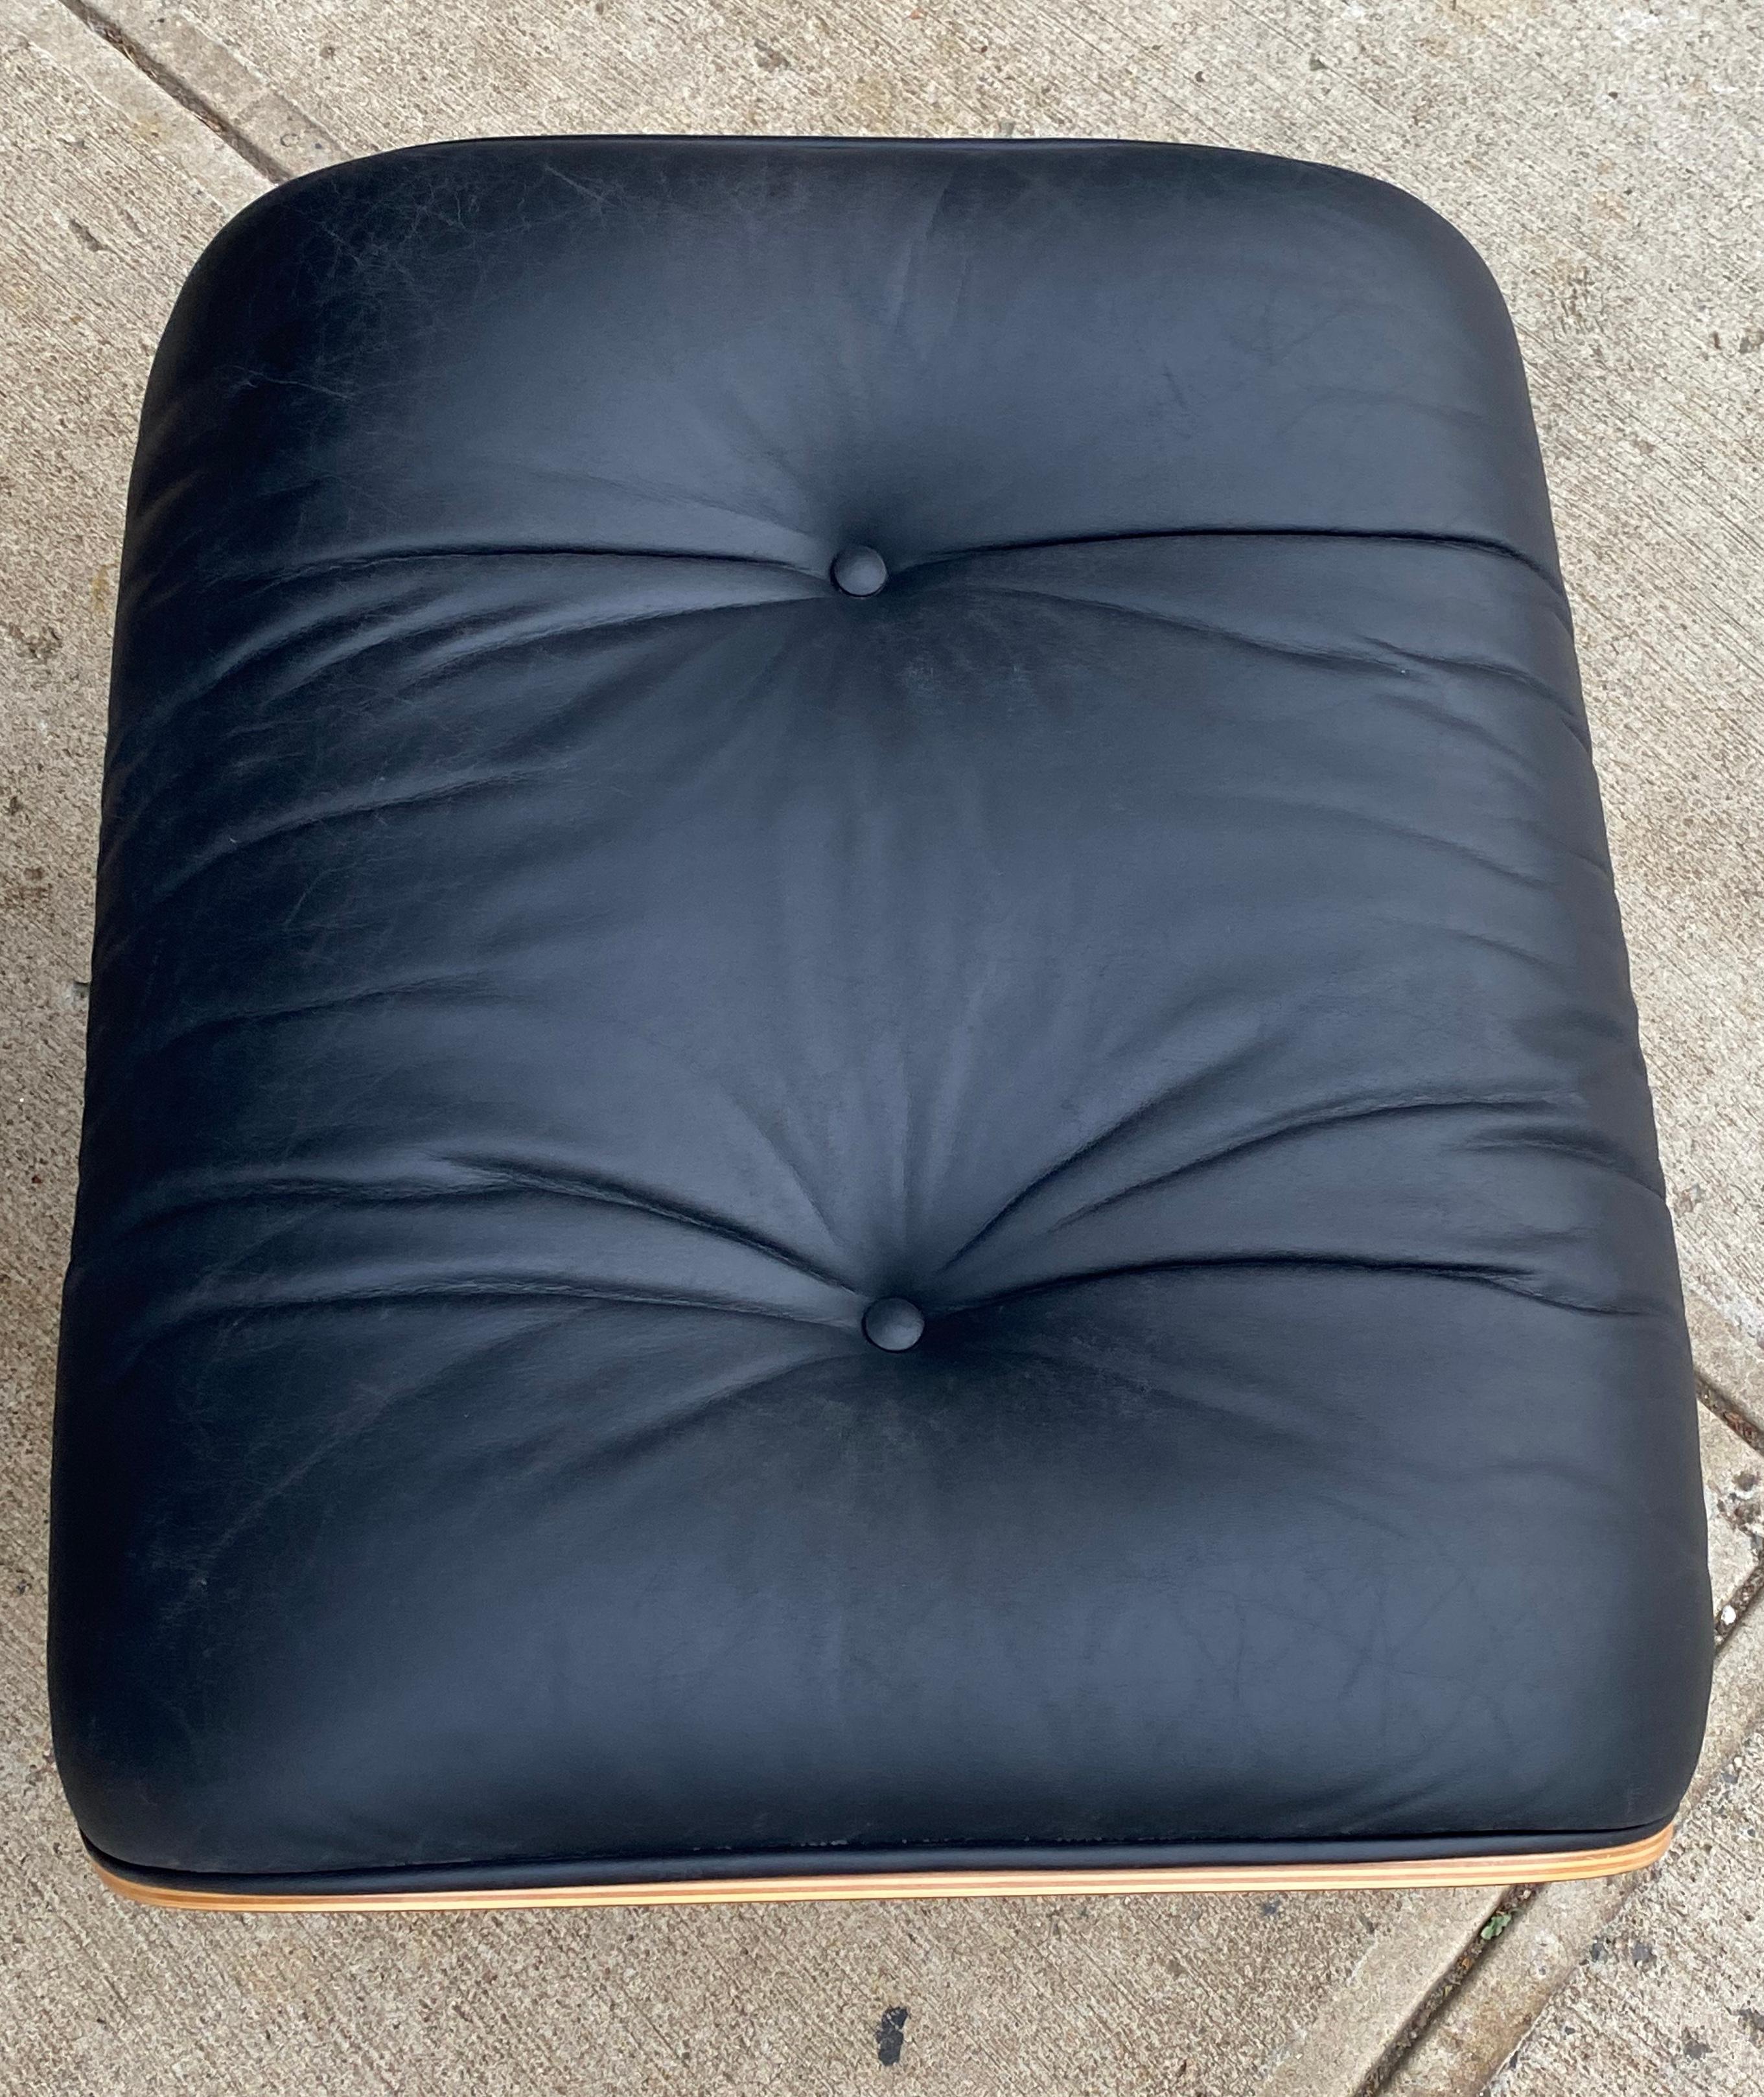 Vintage Herman Miller Eames lounge chair and ottoman. Black leather cushions are a beautiful contrast to the warm tones of the walnut exterior. Wood has been oiled and maintains warm glow. Signed on both chair and ottoman and guaranteed authentic.